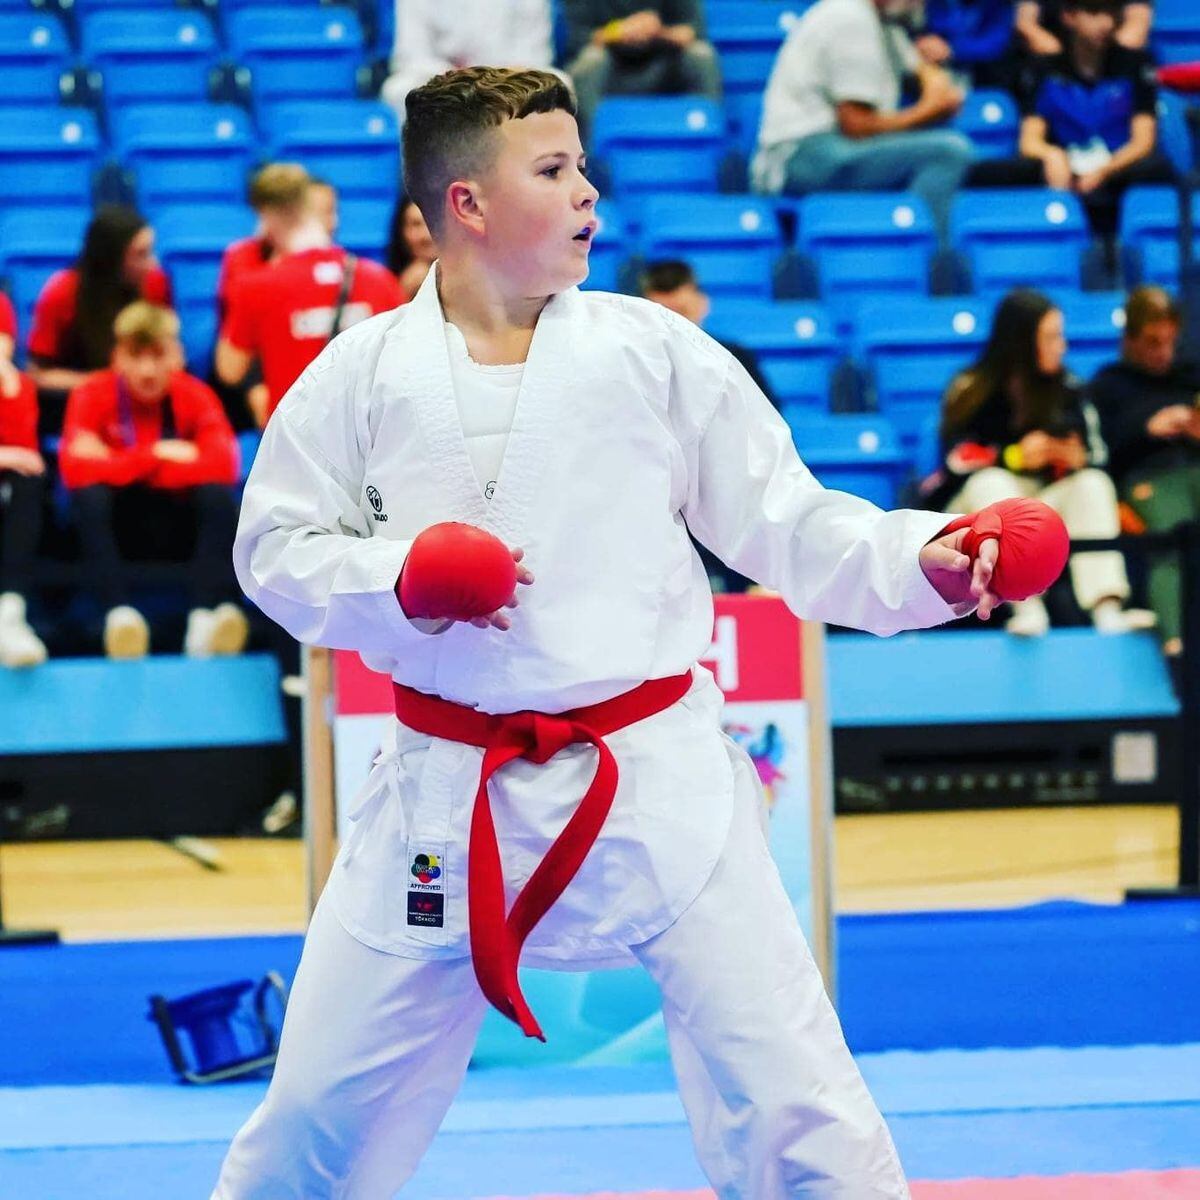 Tai Bowen was recently selected to represent the English Karate Federation following his Commonwealth success